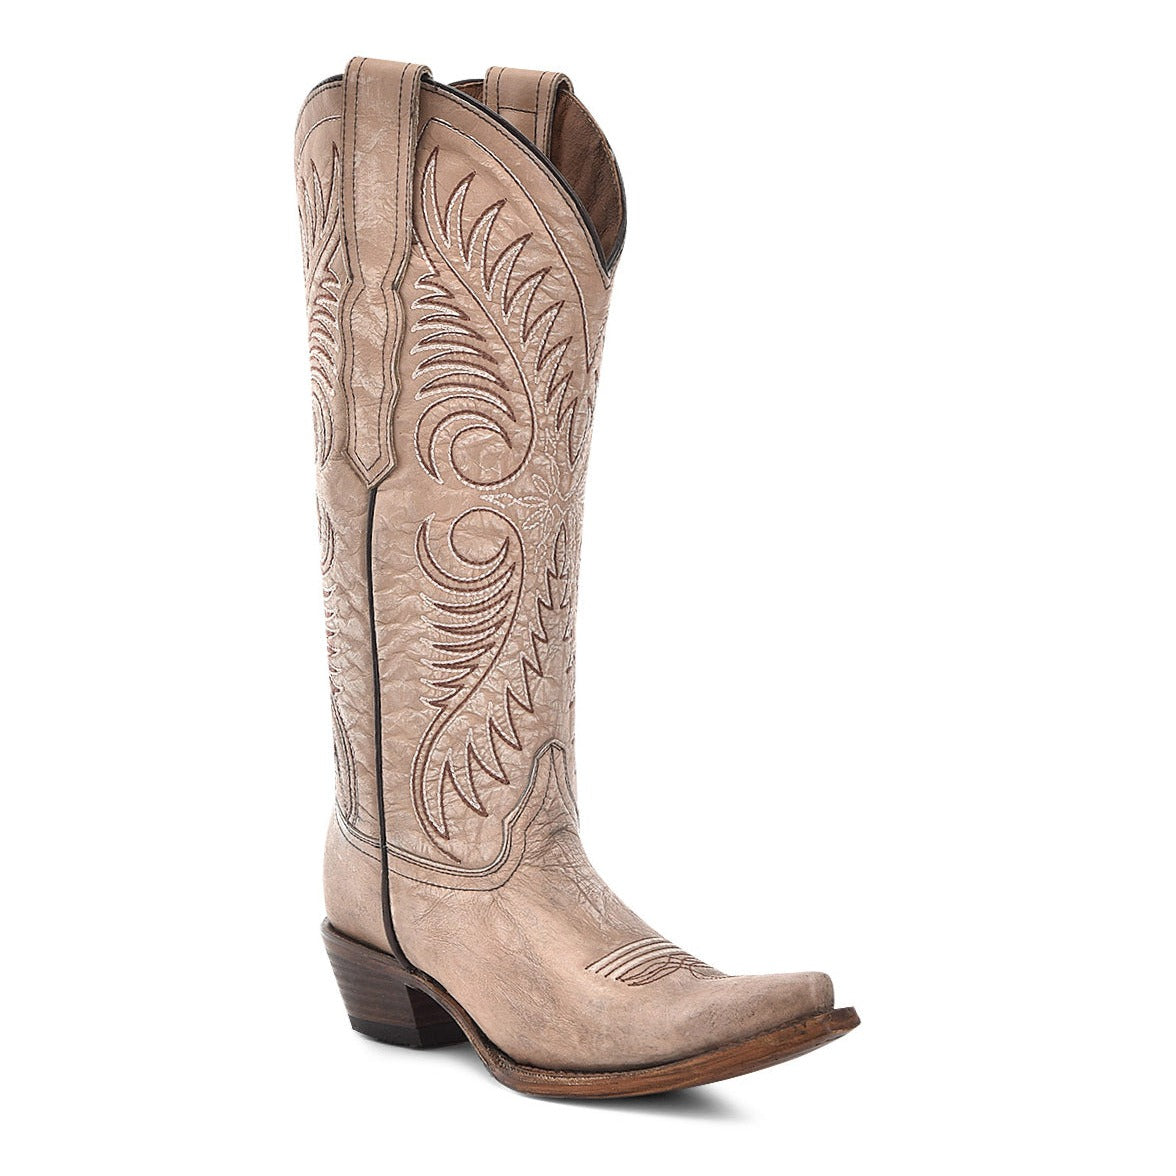 Circle G Women's Sand Cowhide Embroidered Snip Toe Western Boot